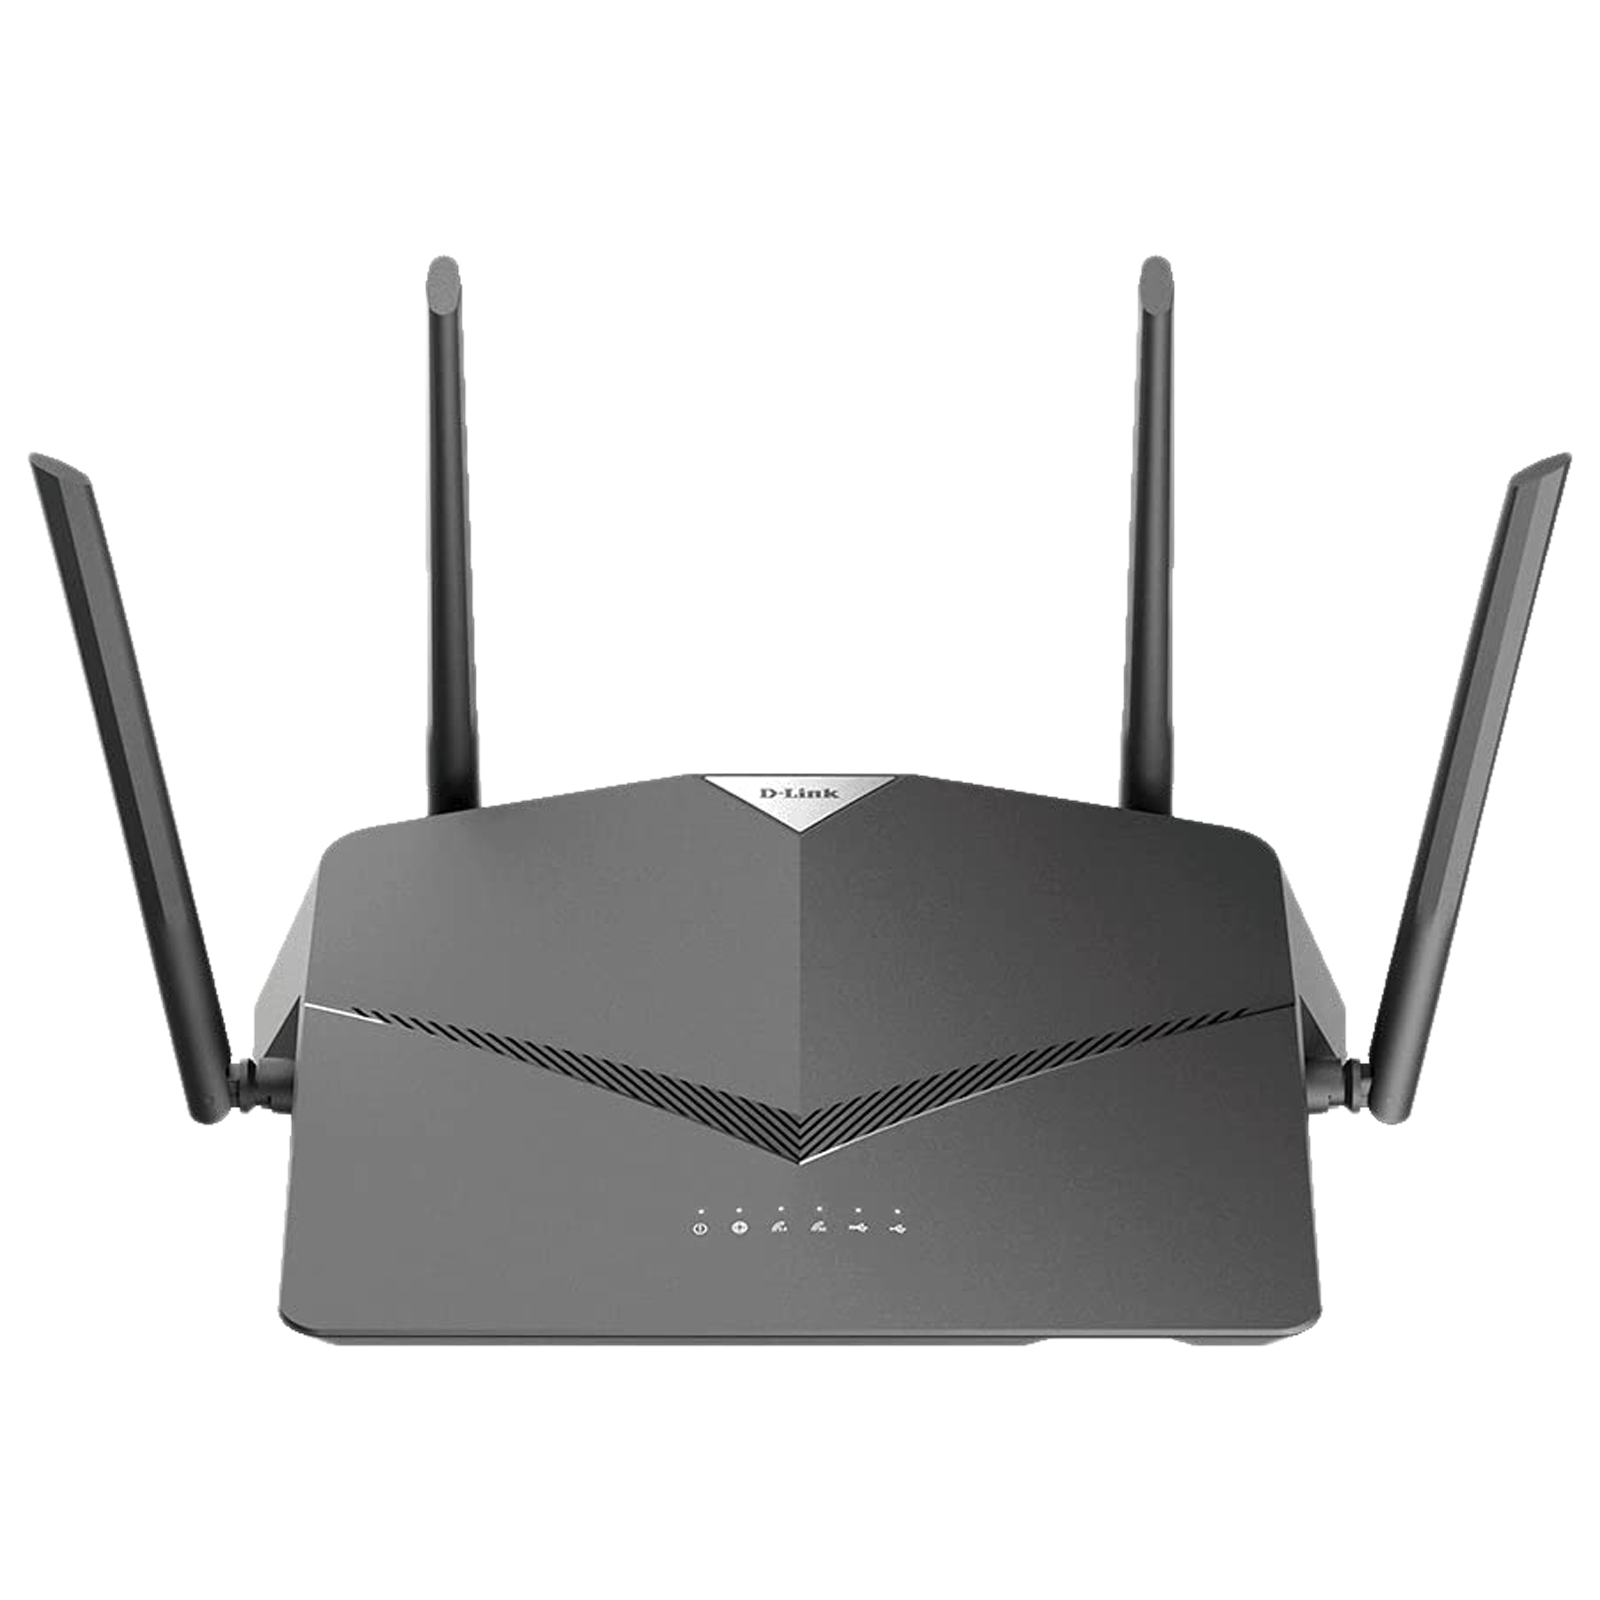 pinion Seminary forligsmanden Buy D-Link DIR-2640 Dual Band 2600 Mbps Wi-Fi Router (4 Antennas, 3 LAN  Ports, MIMO Supported, Black) Online – Croma